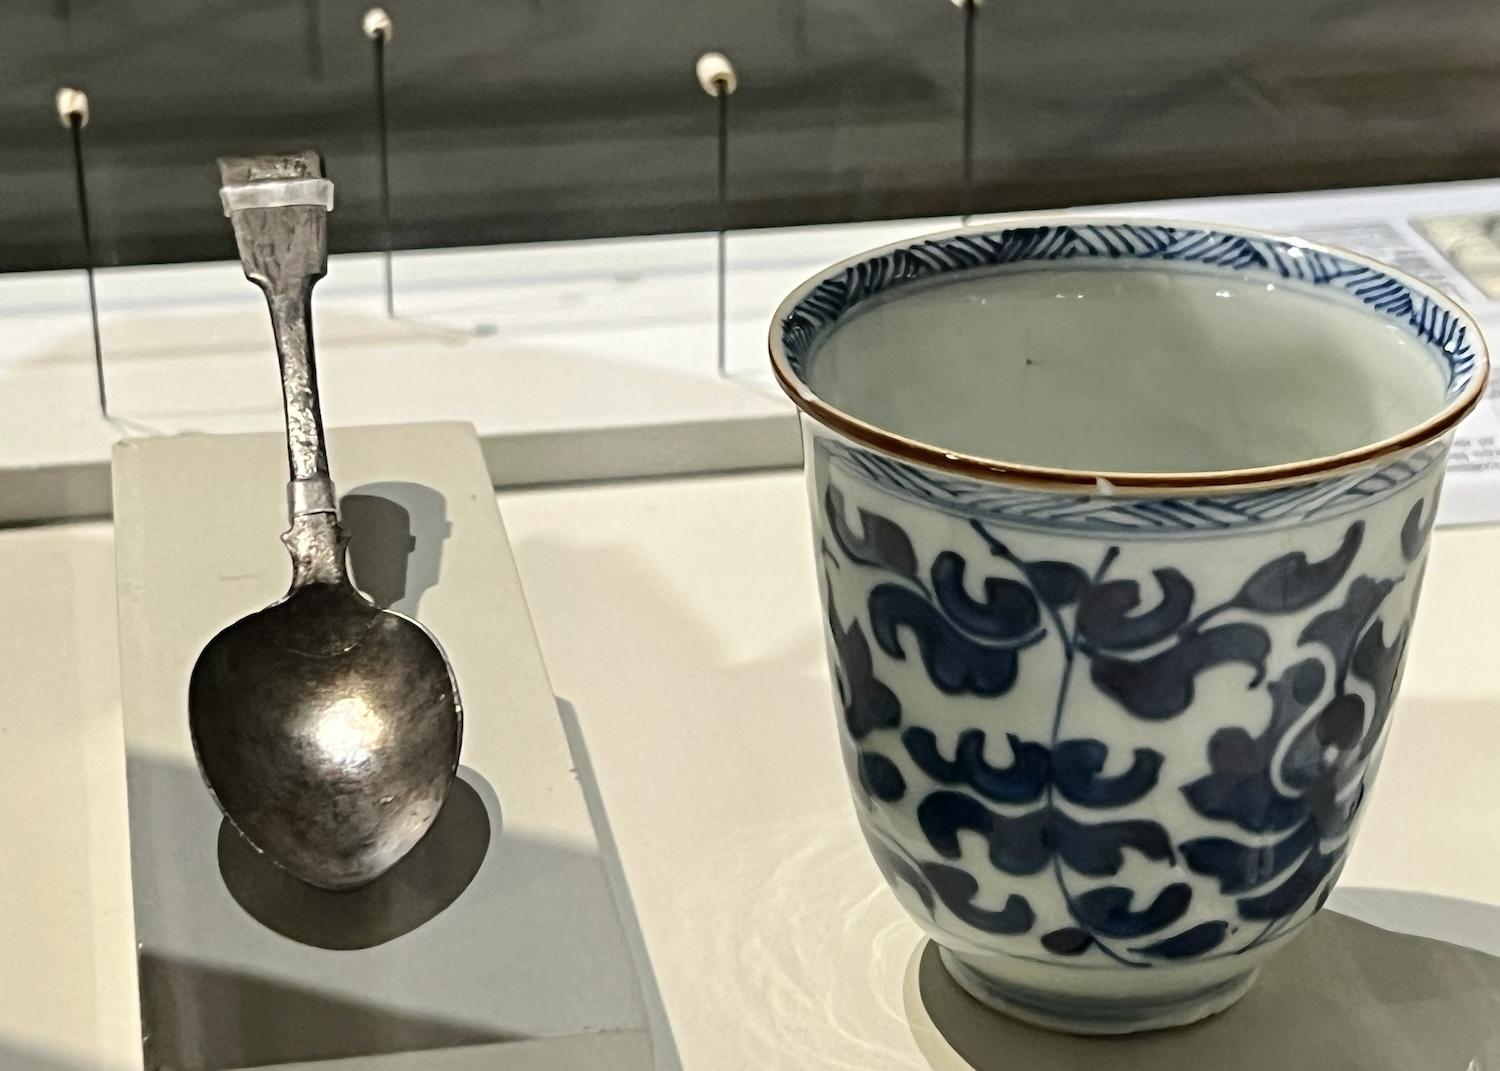 One artifact at Saint-Louis Forts and Châteaux National Historic Site is this porcelain hot chocolate mug from China.